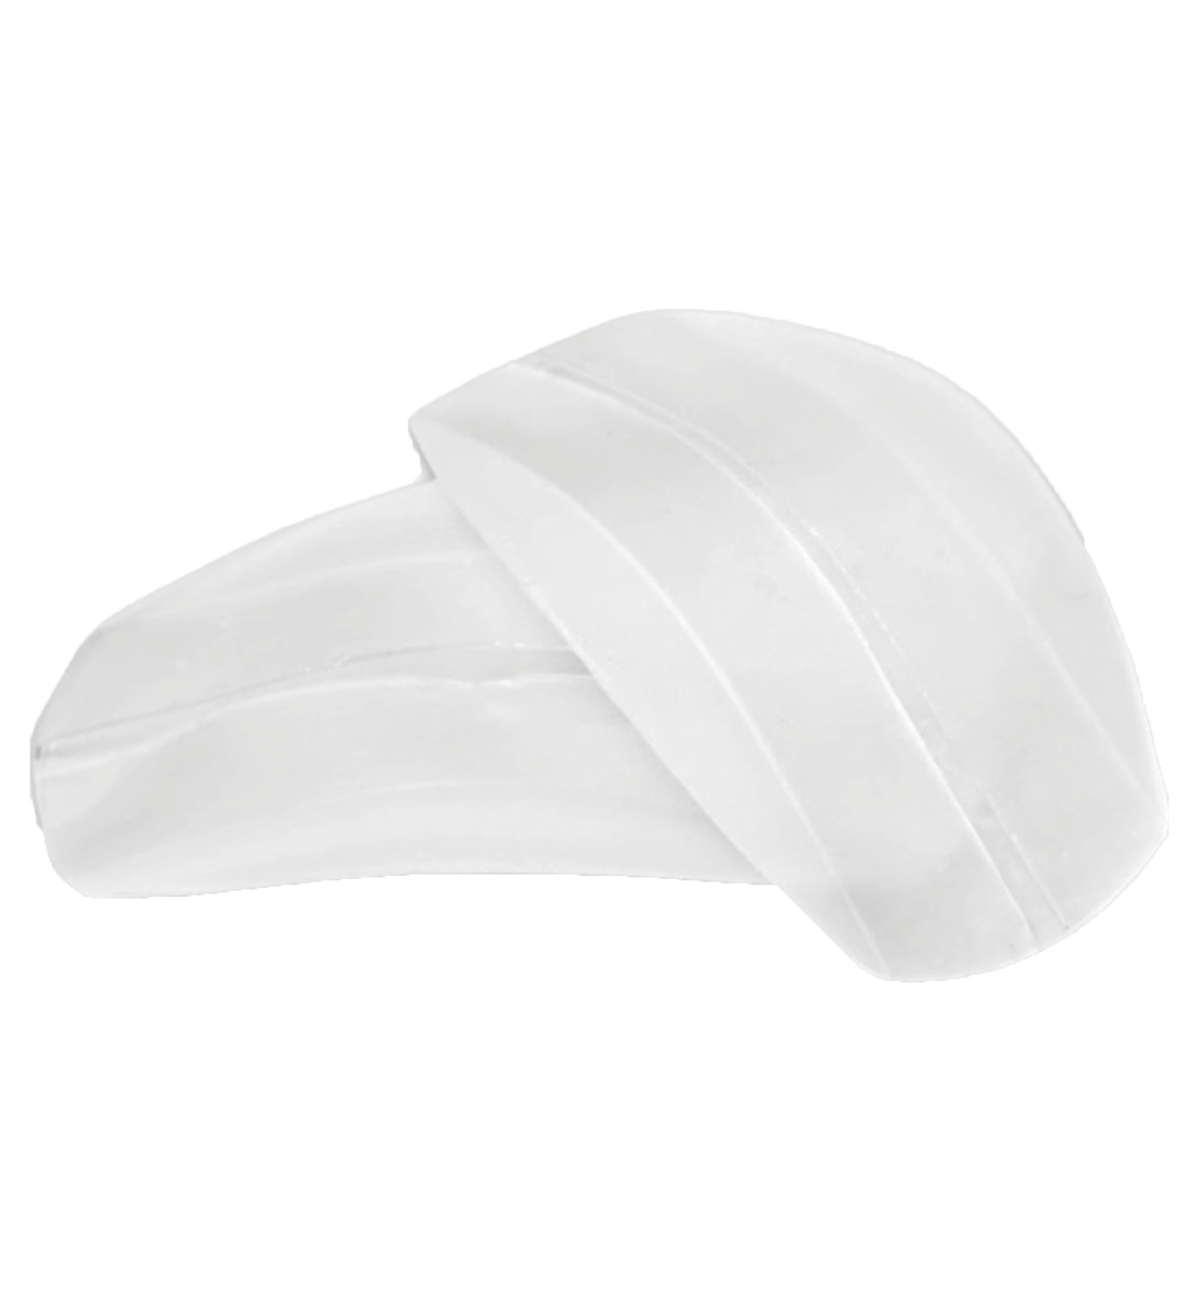 BeConfident Silicone Comfort Shoulder Cushions (BC30075) - Clear